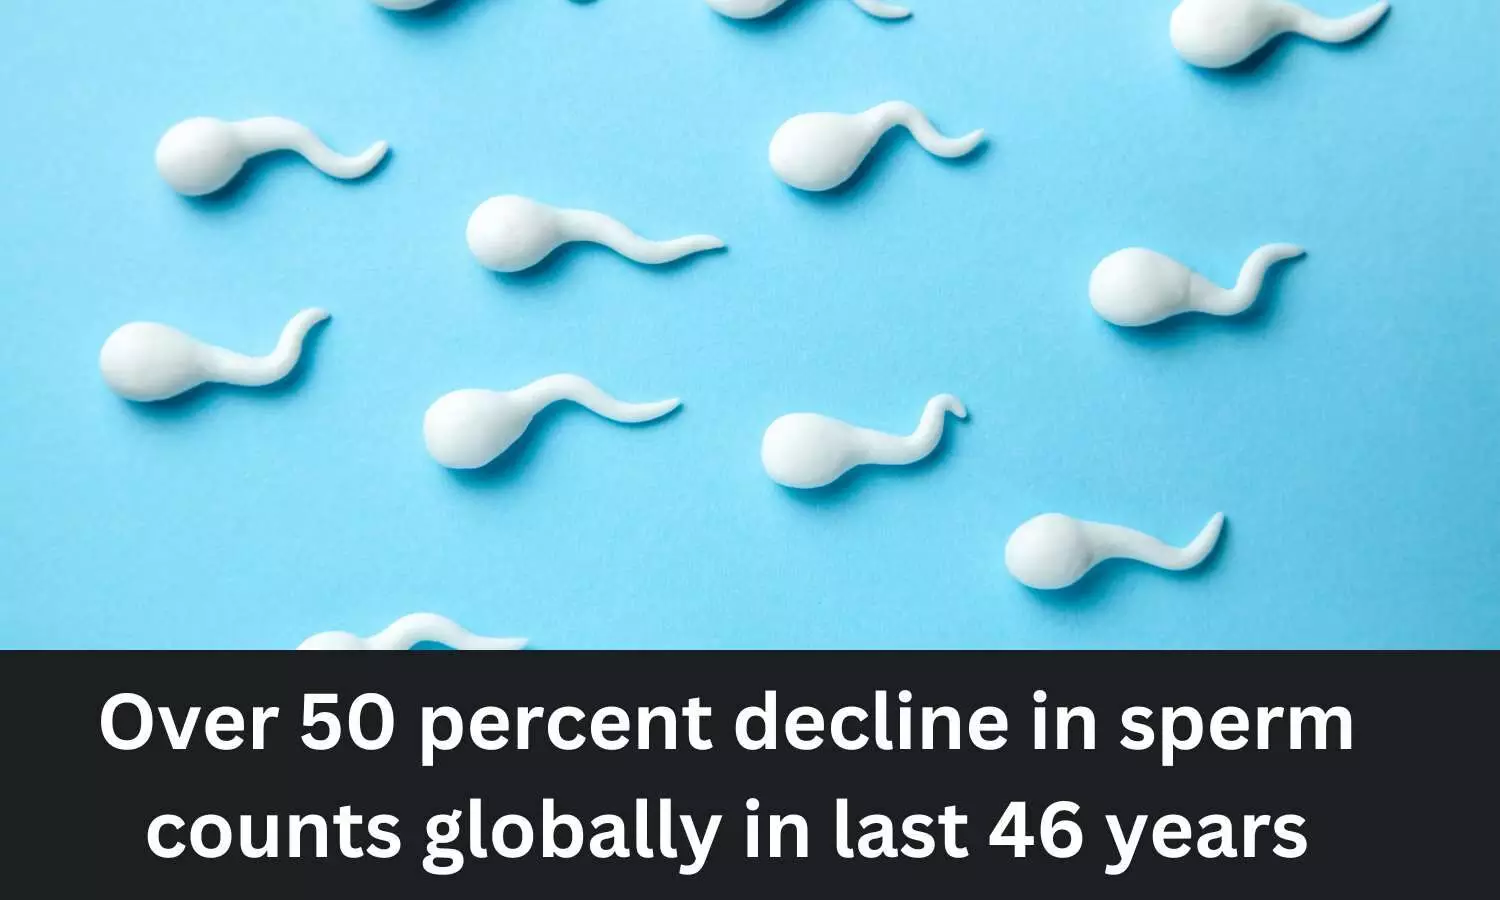 Over 50 percent decline in sperm counts globally in last 46 years, even in India: Study